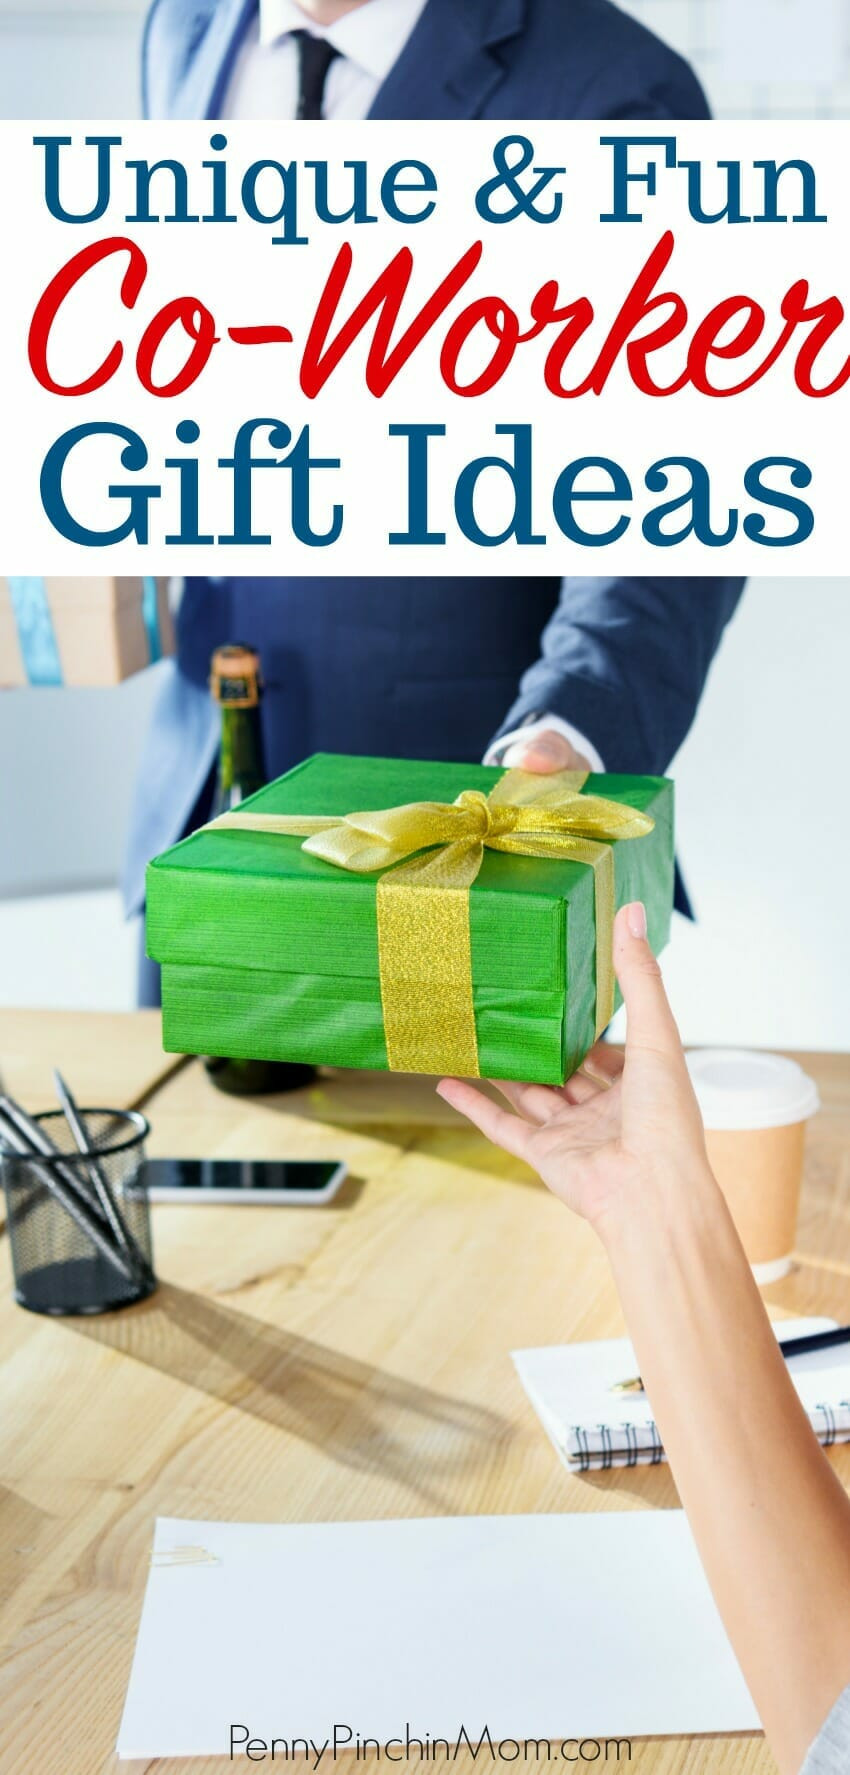 Christmas Gift Ideas For Female Coworkers
 Co Worker Gift Ideas for Anyone on Your List This Year